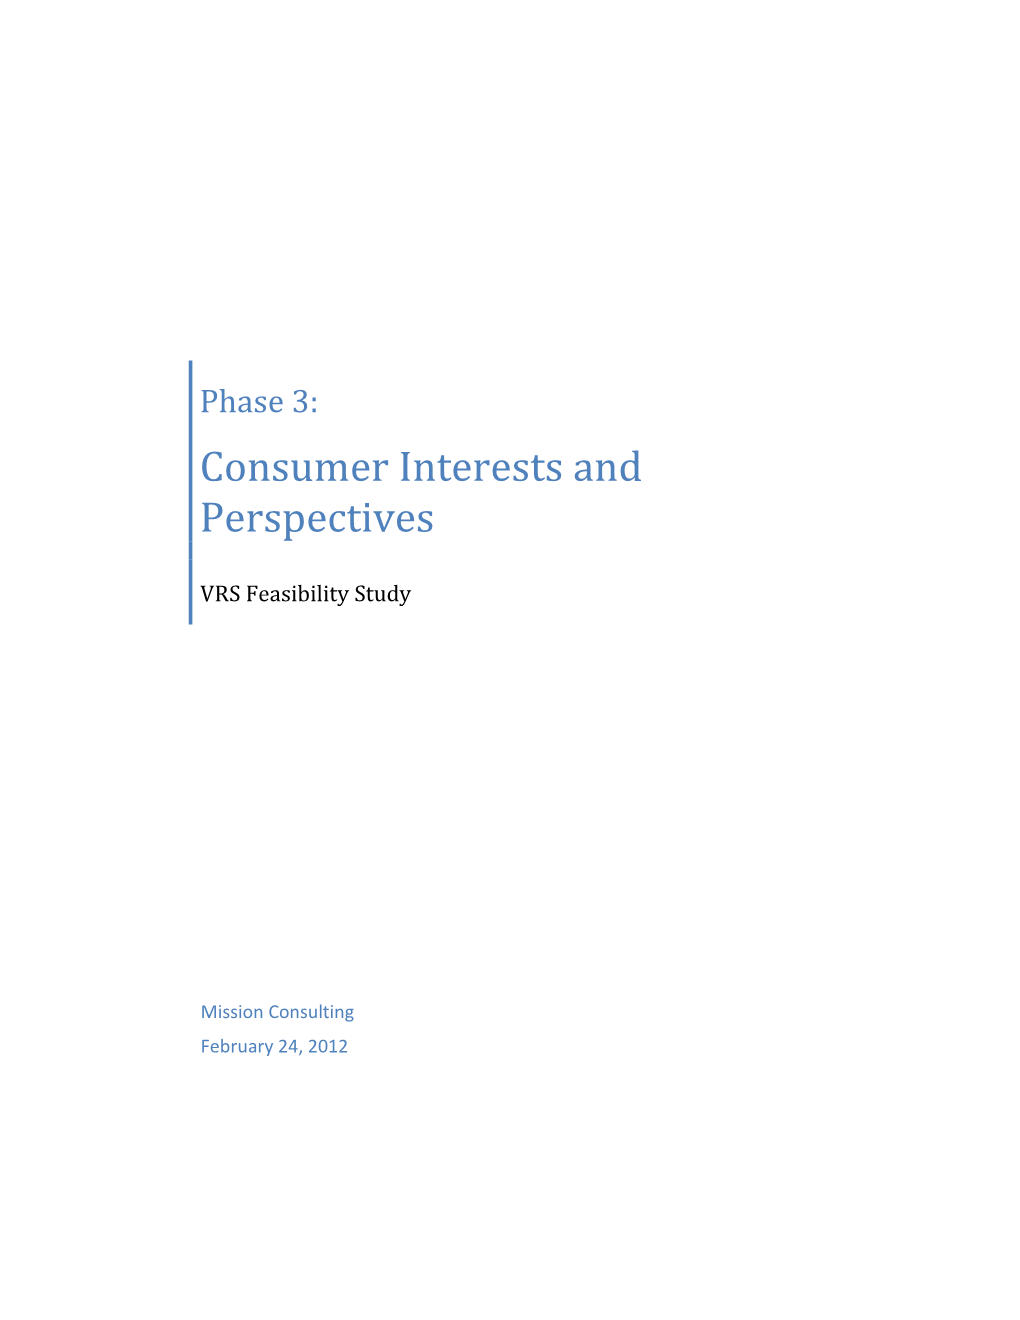 Consumer Interests and Perspectives